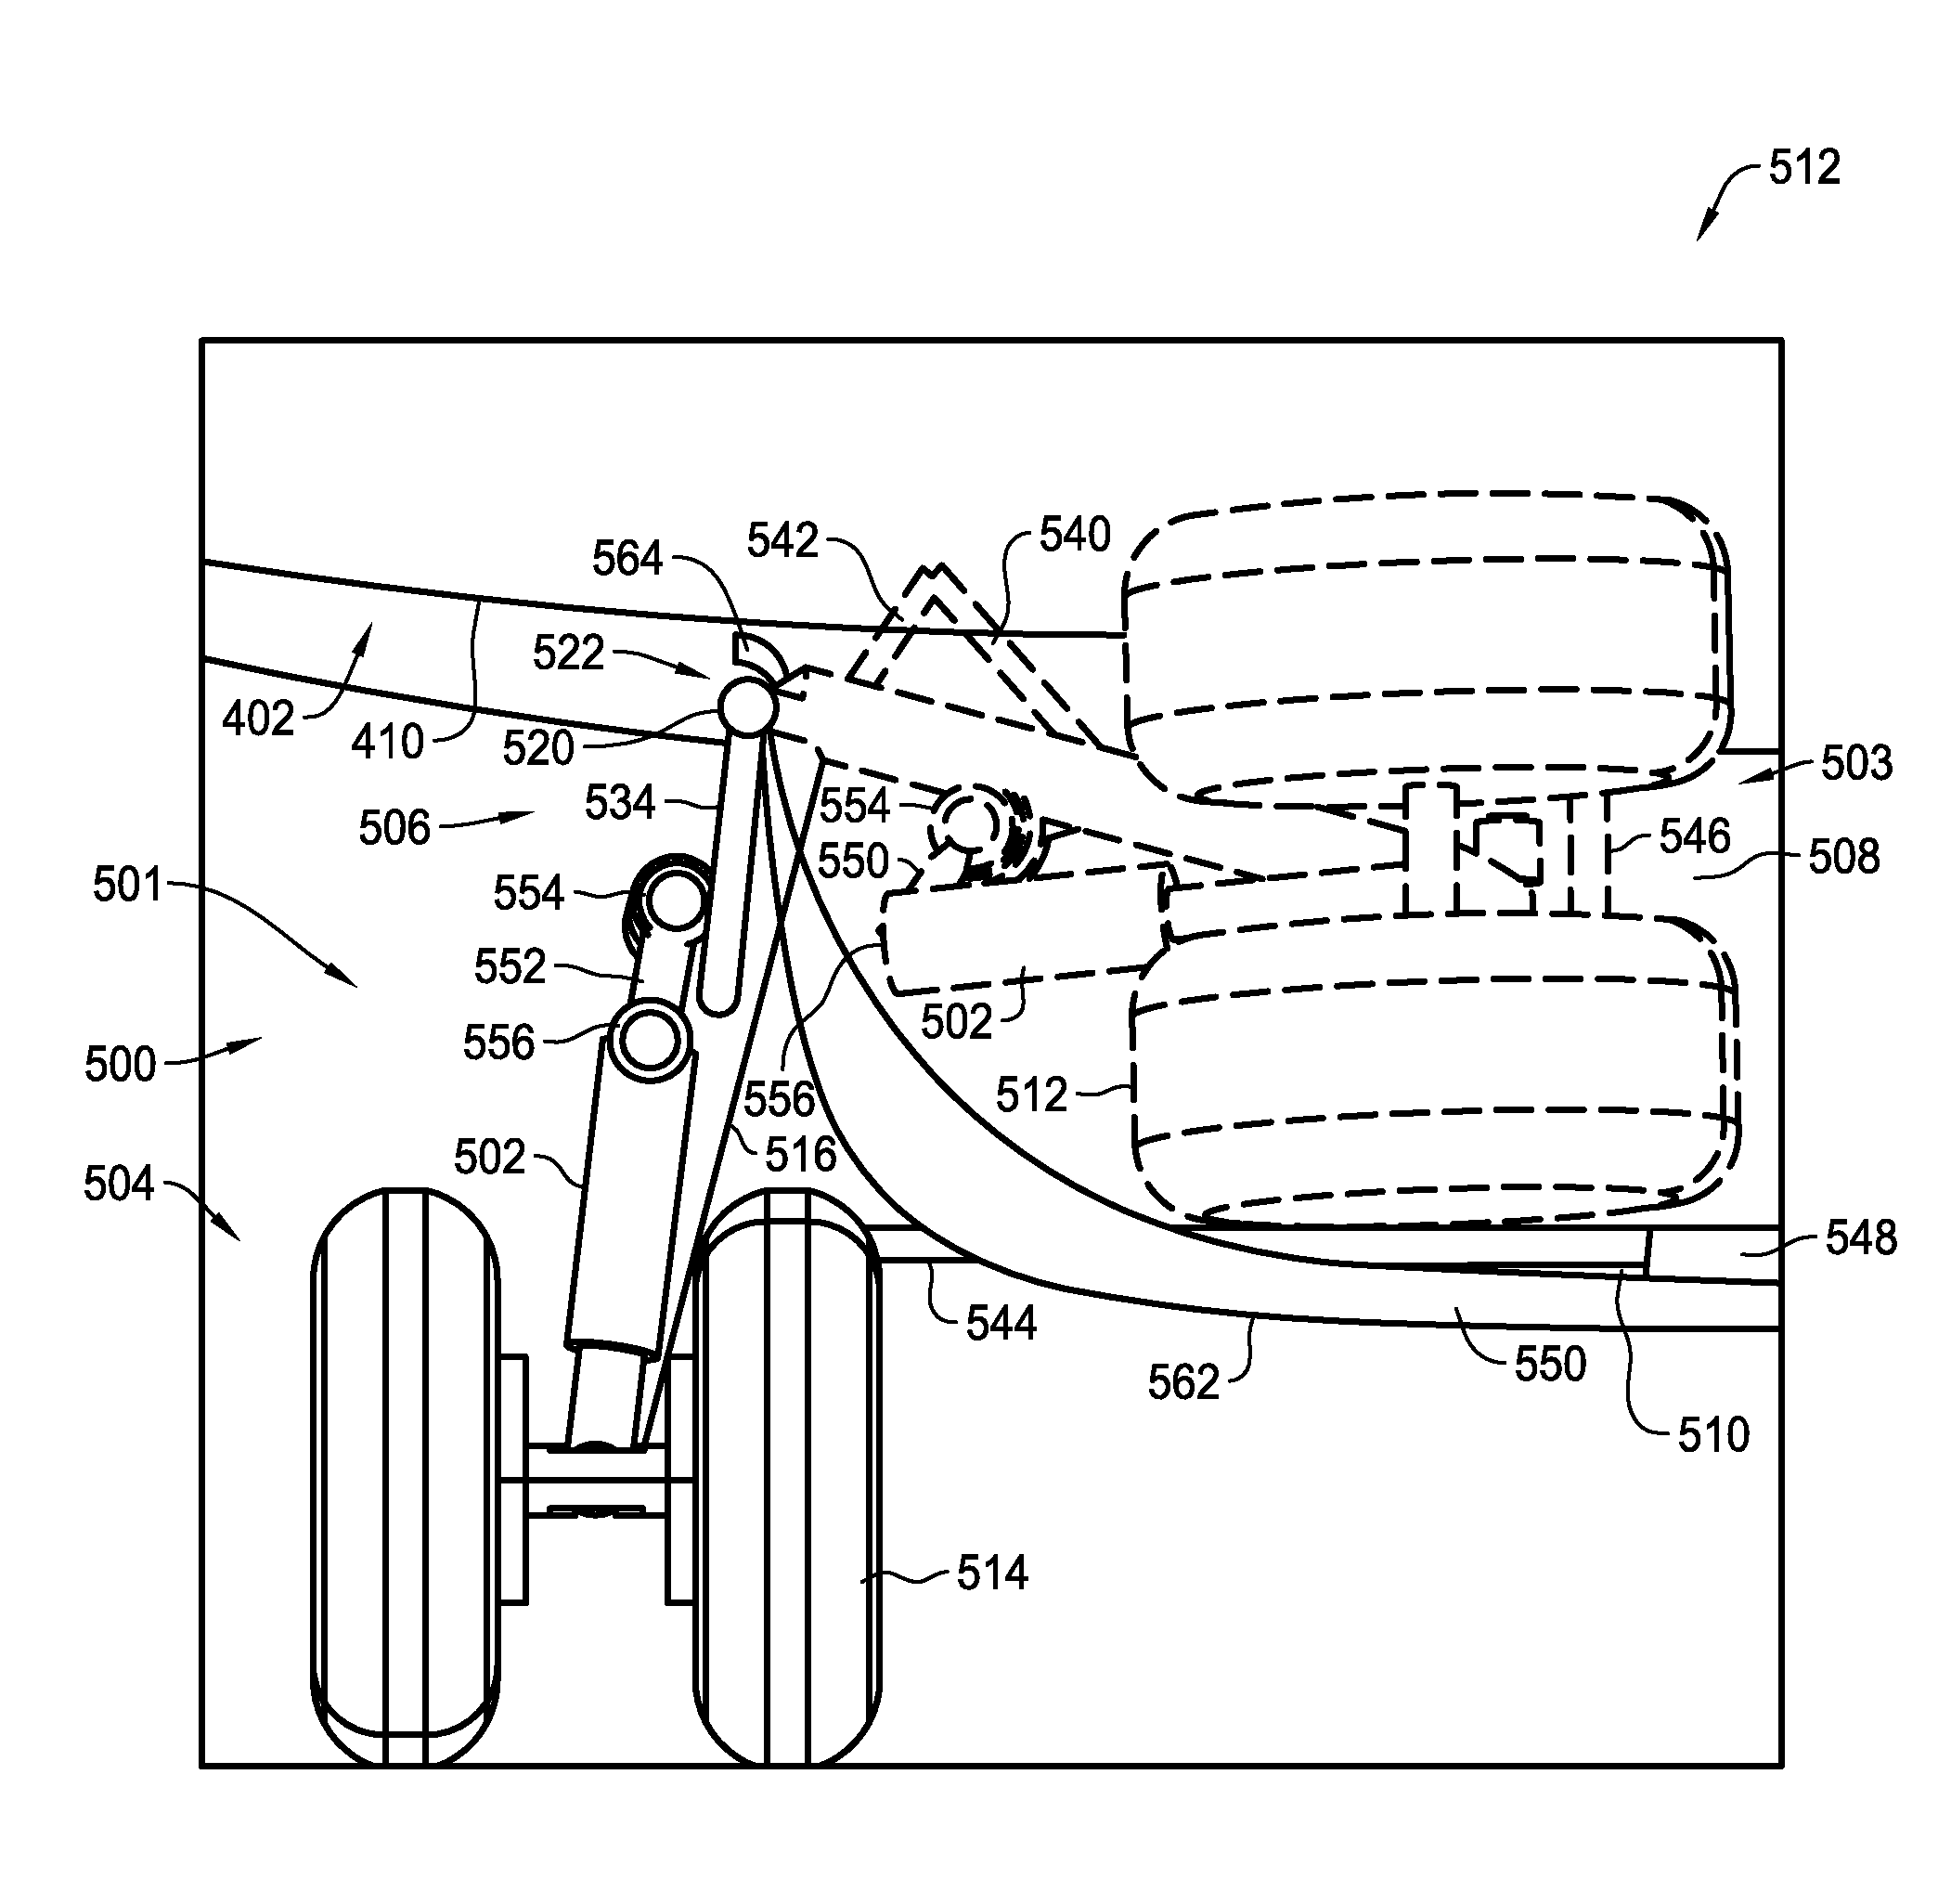 Fuselage-mounted landing gear assembly for use with a low wing aircraft